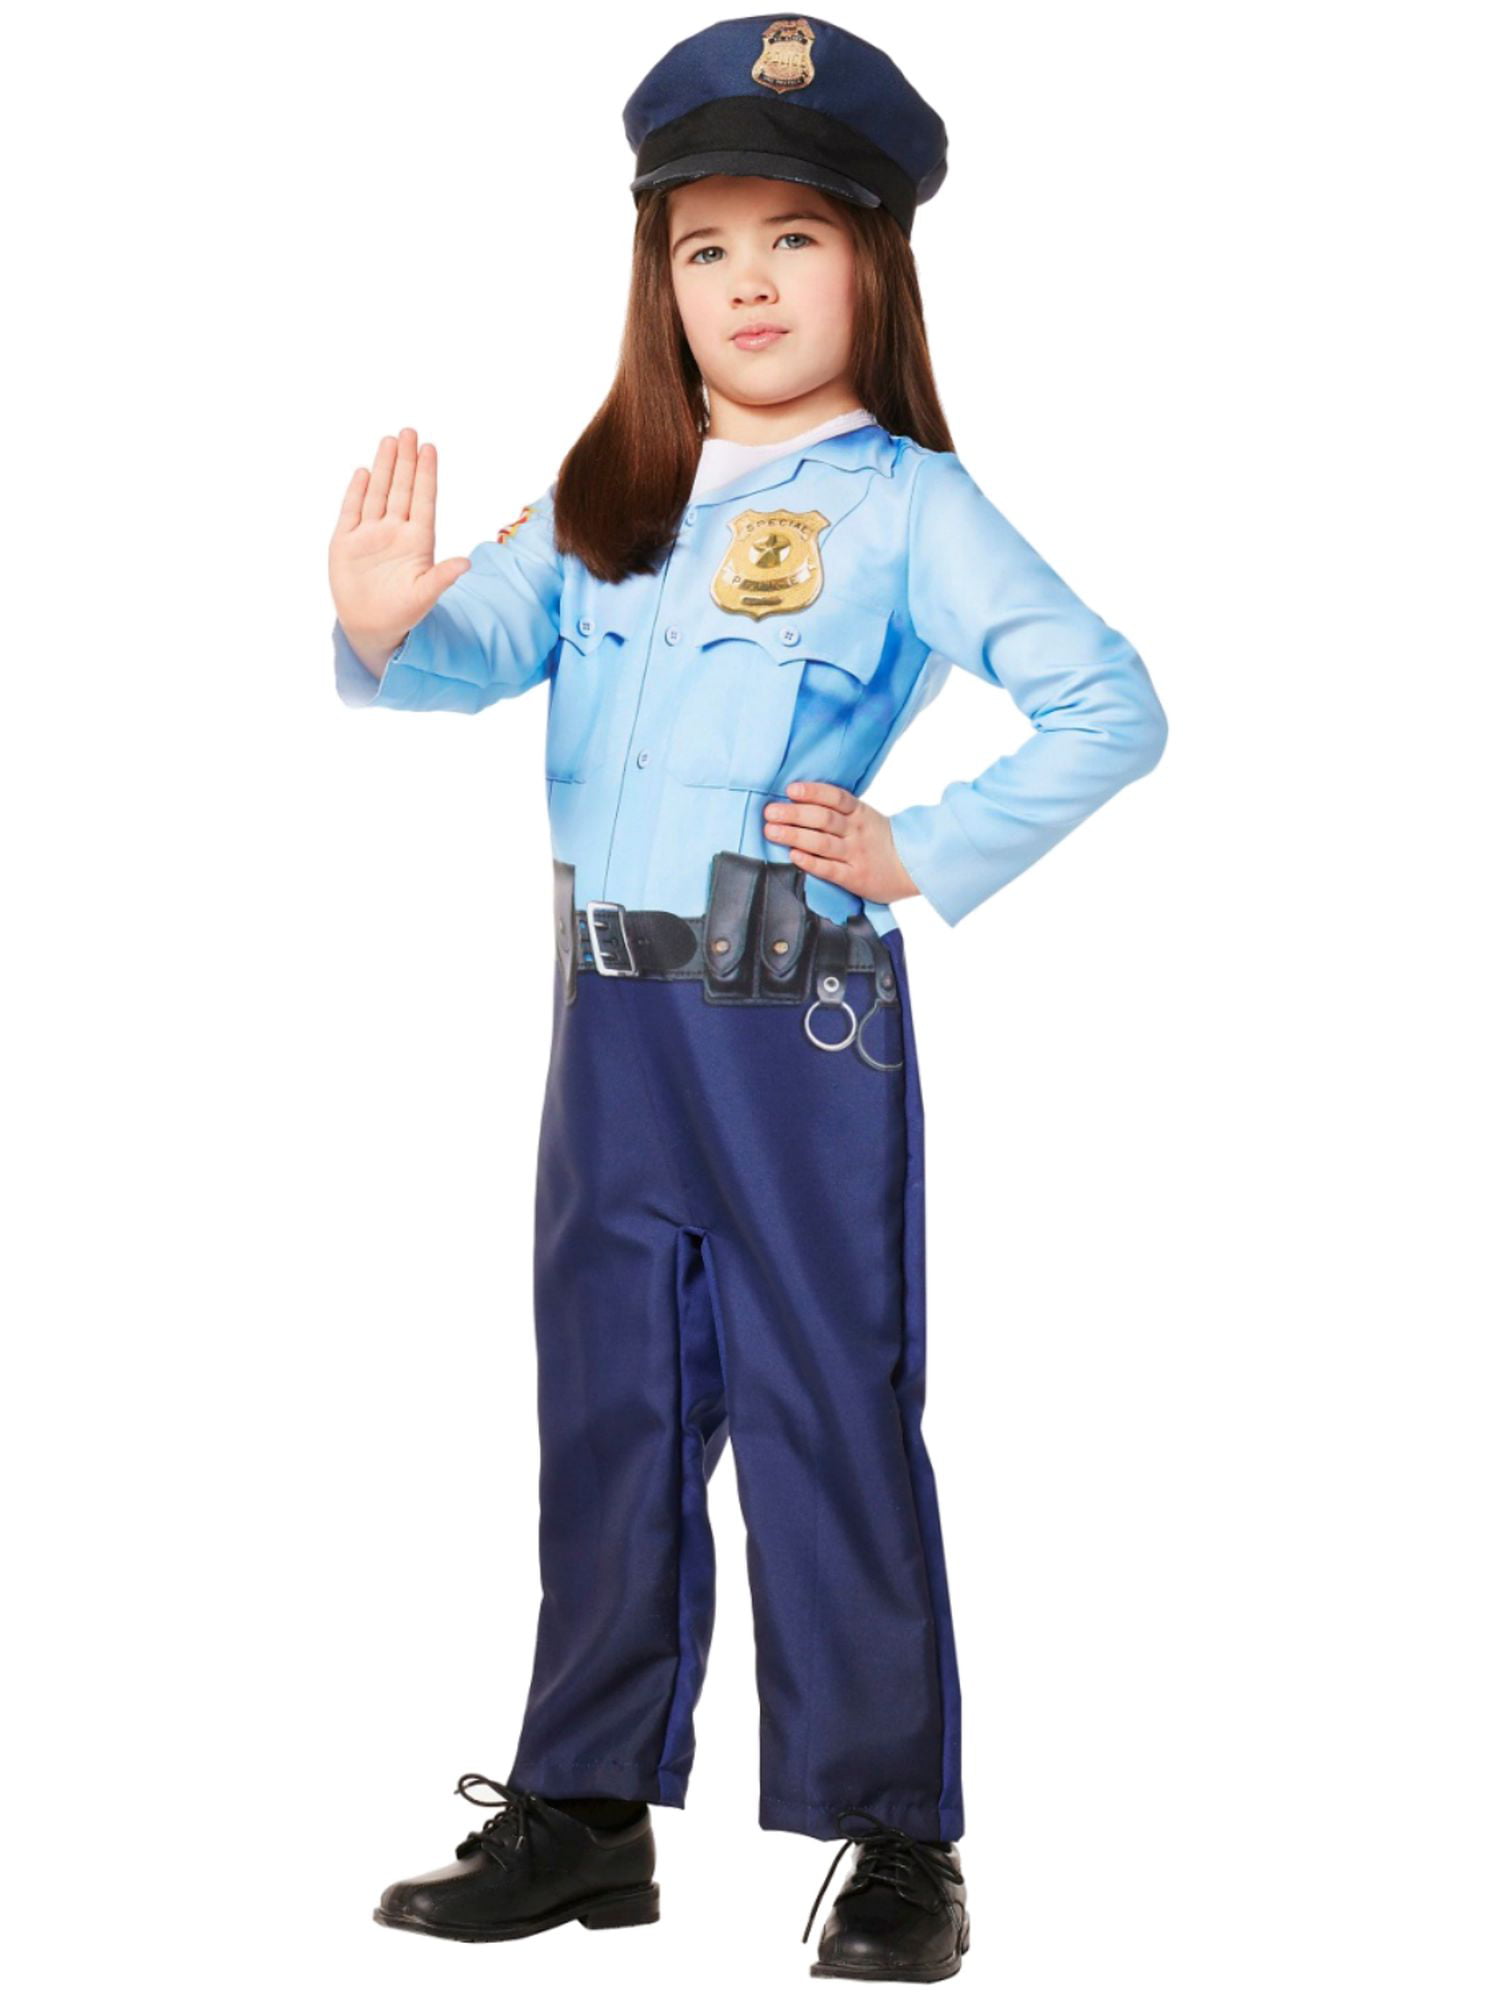 Toddl Amscan 848443 Girls Classic Police Officer Costume 